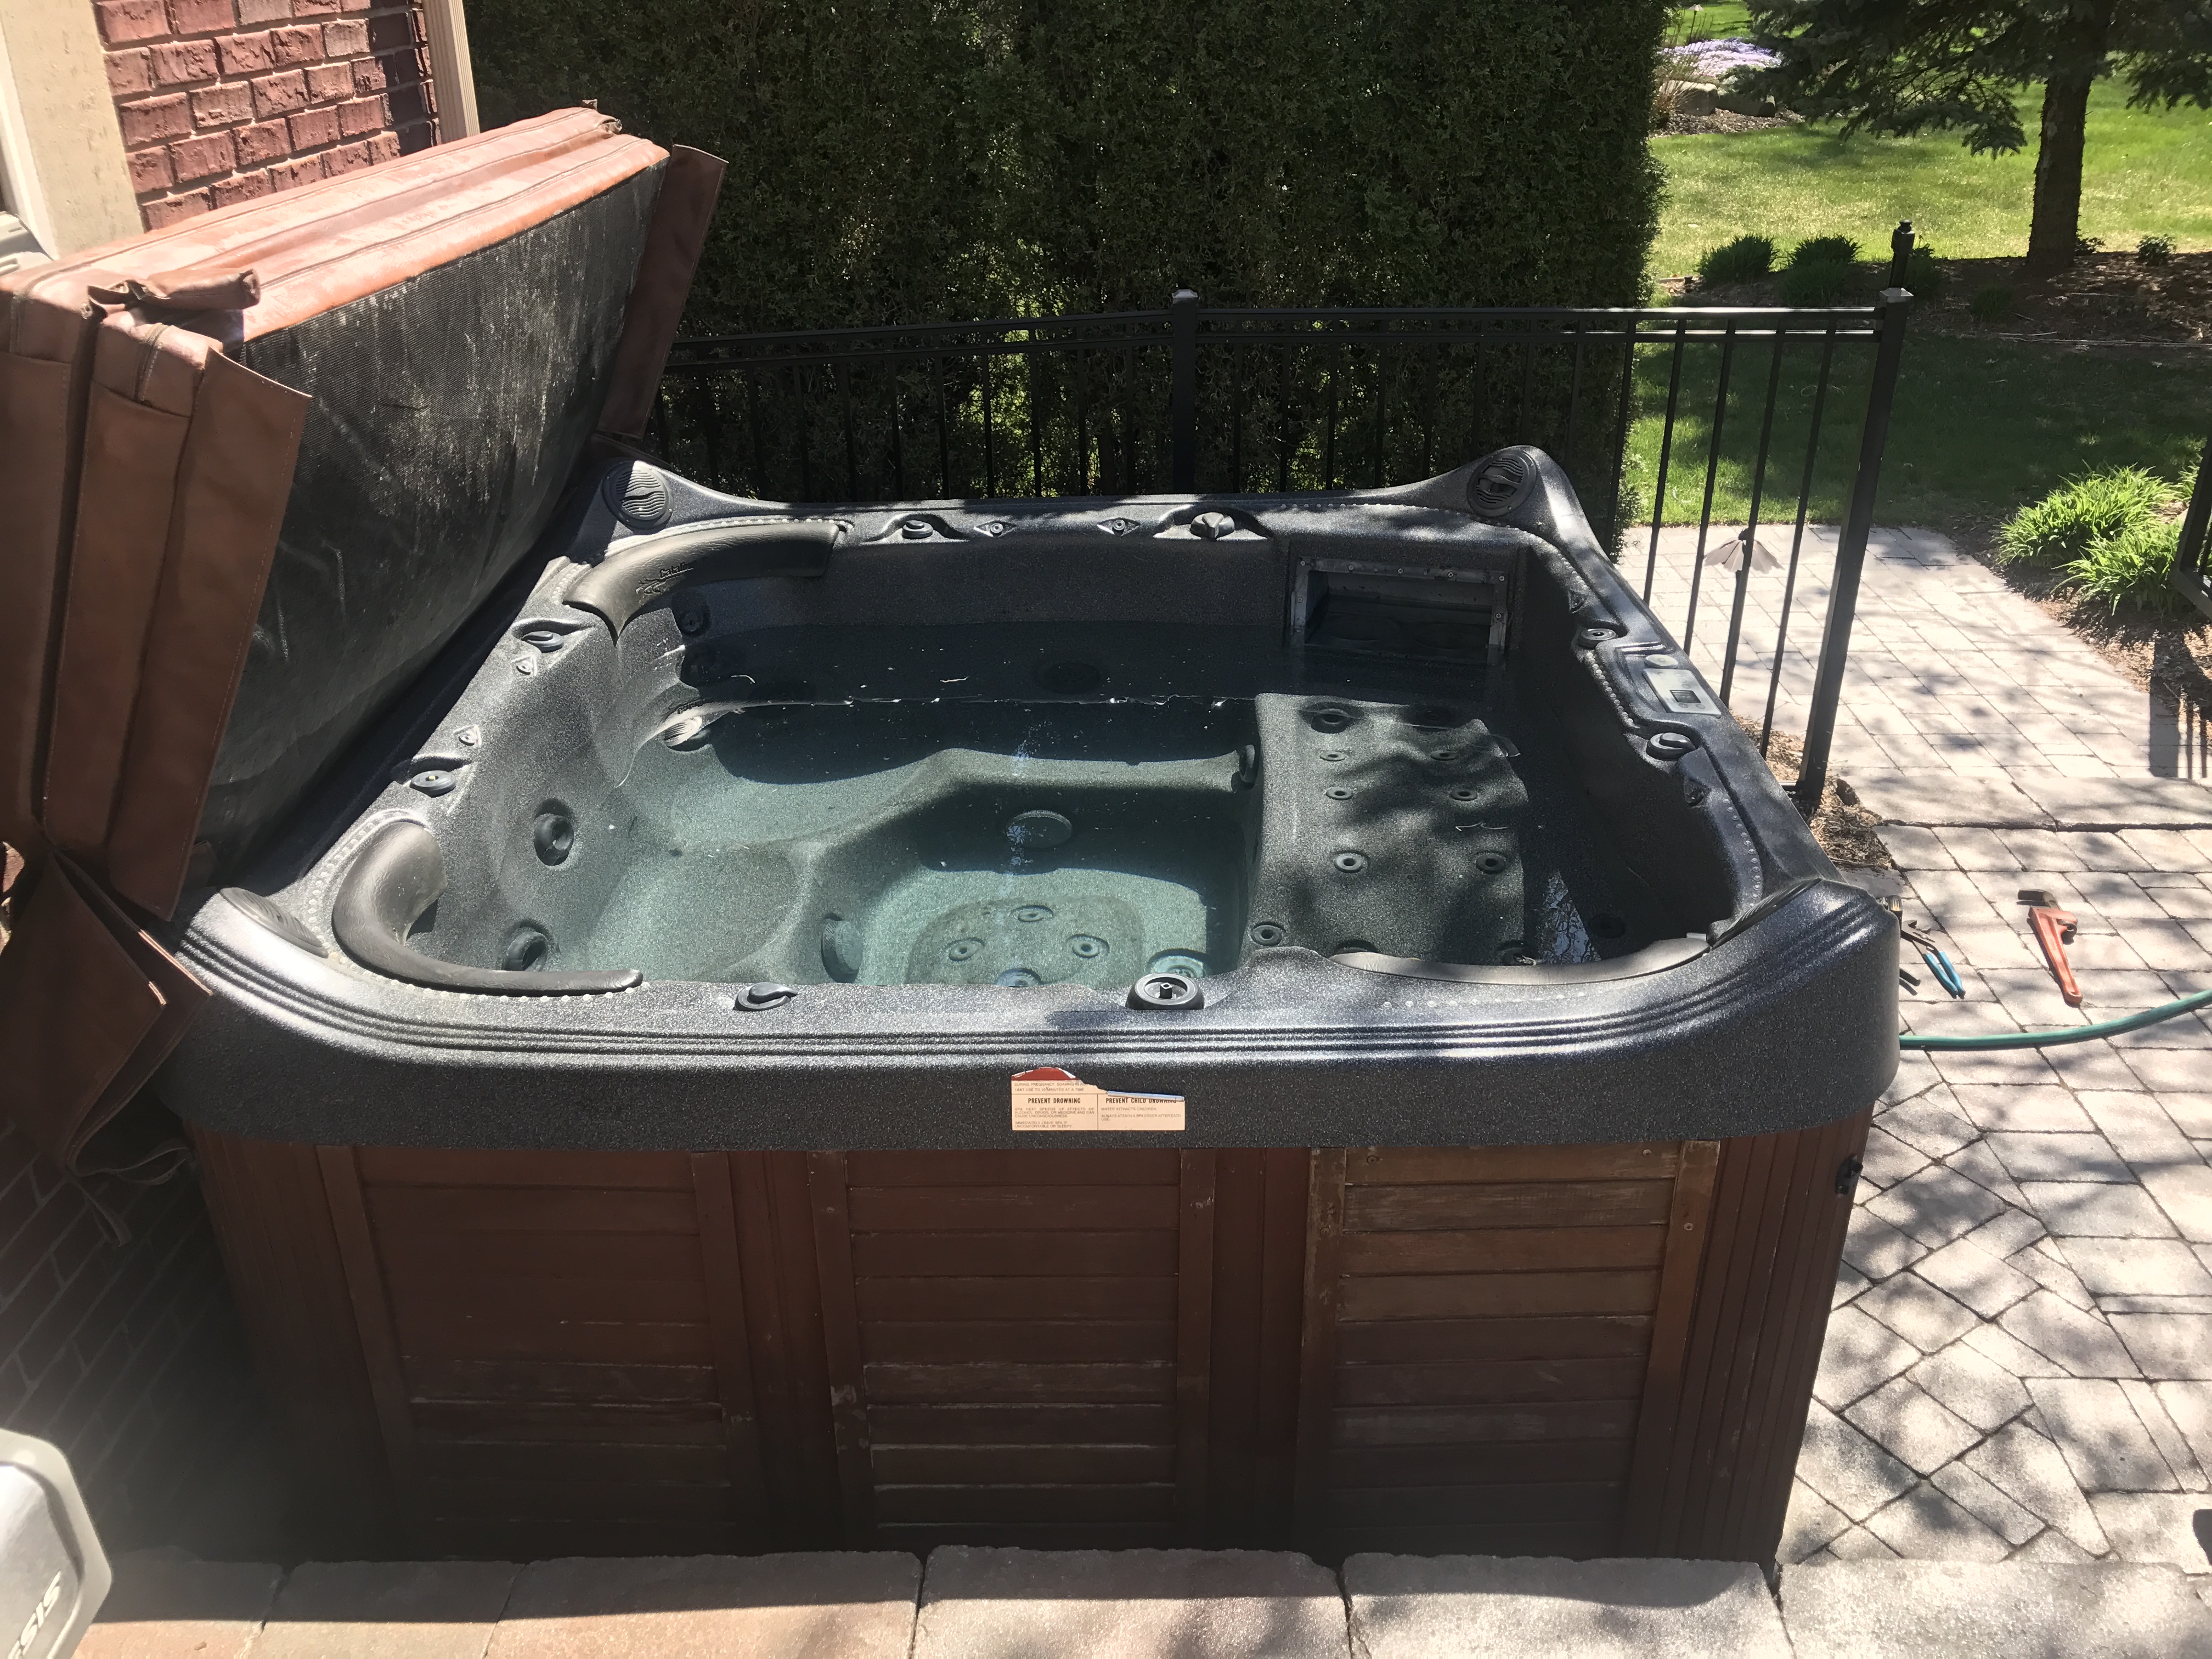 Catalina Hot Tub For Sale Hot Tub Insider